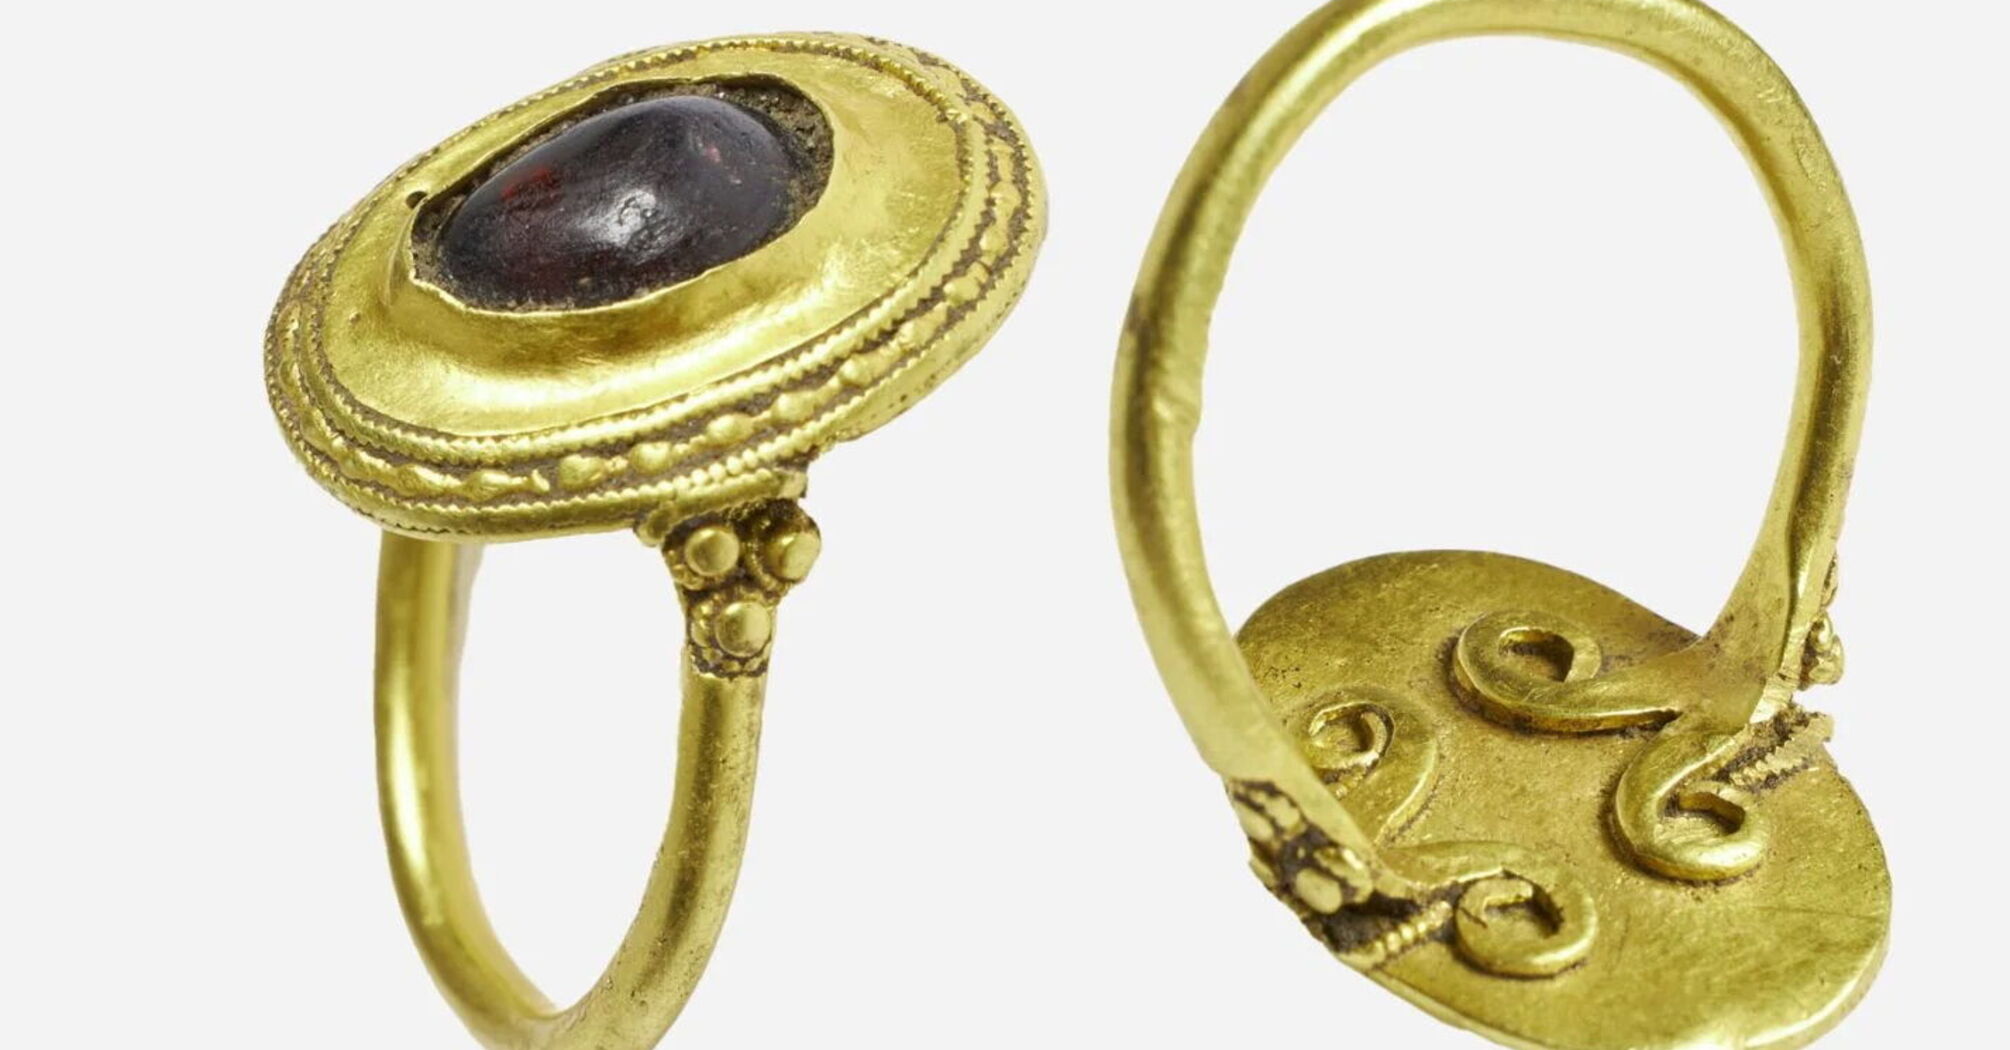 A 500-year-old gold ring found in Denmark: it belonged to a representative of the Merovingian dynasty